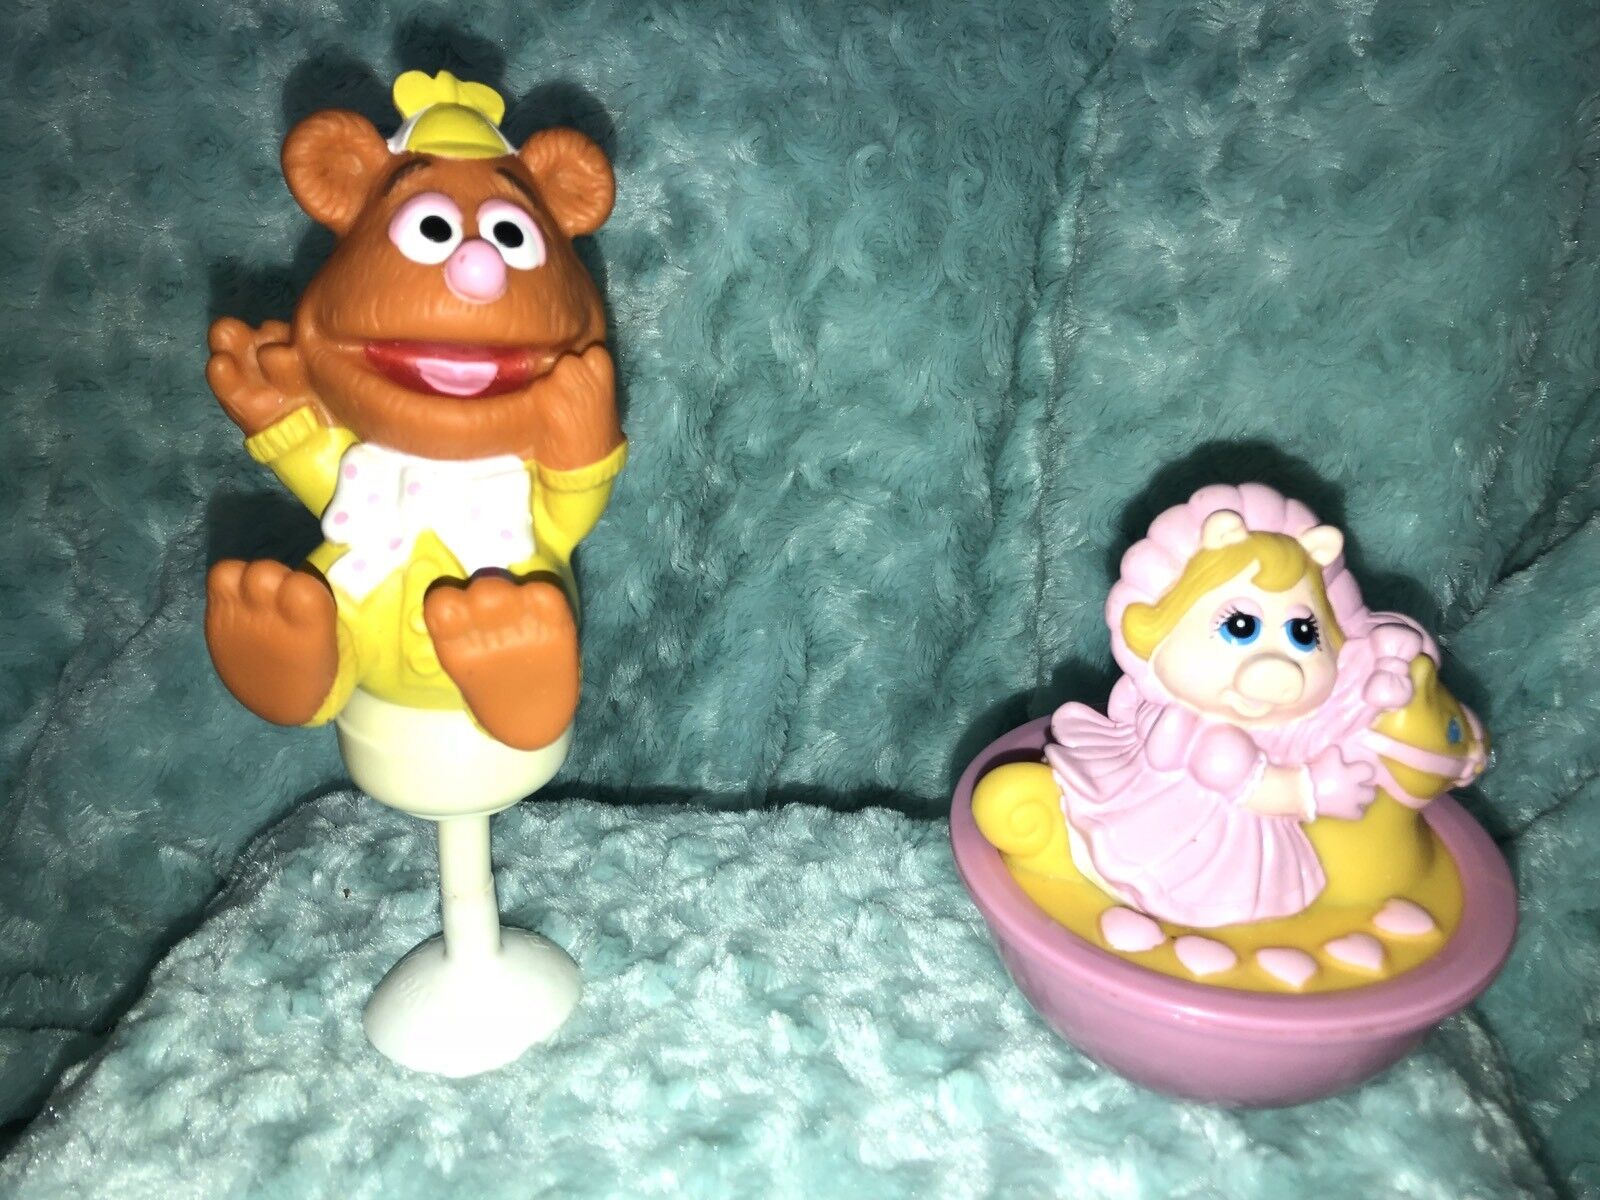 Miss Piggy Vintage Roly Poly Chime Ball 1989 Remco Toy & Playskool FOZZI BEAR 